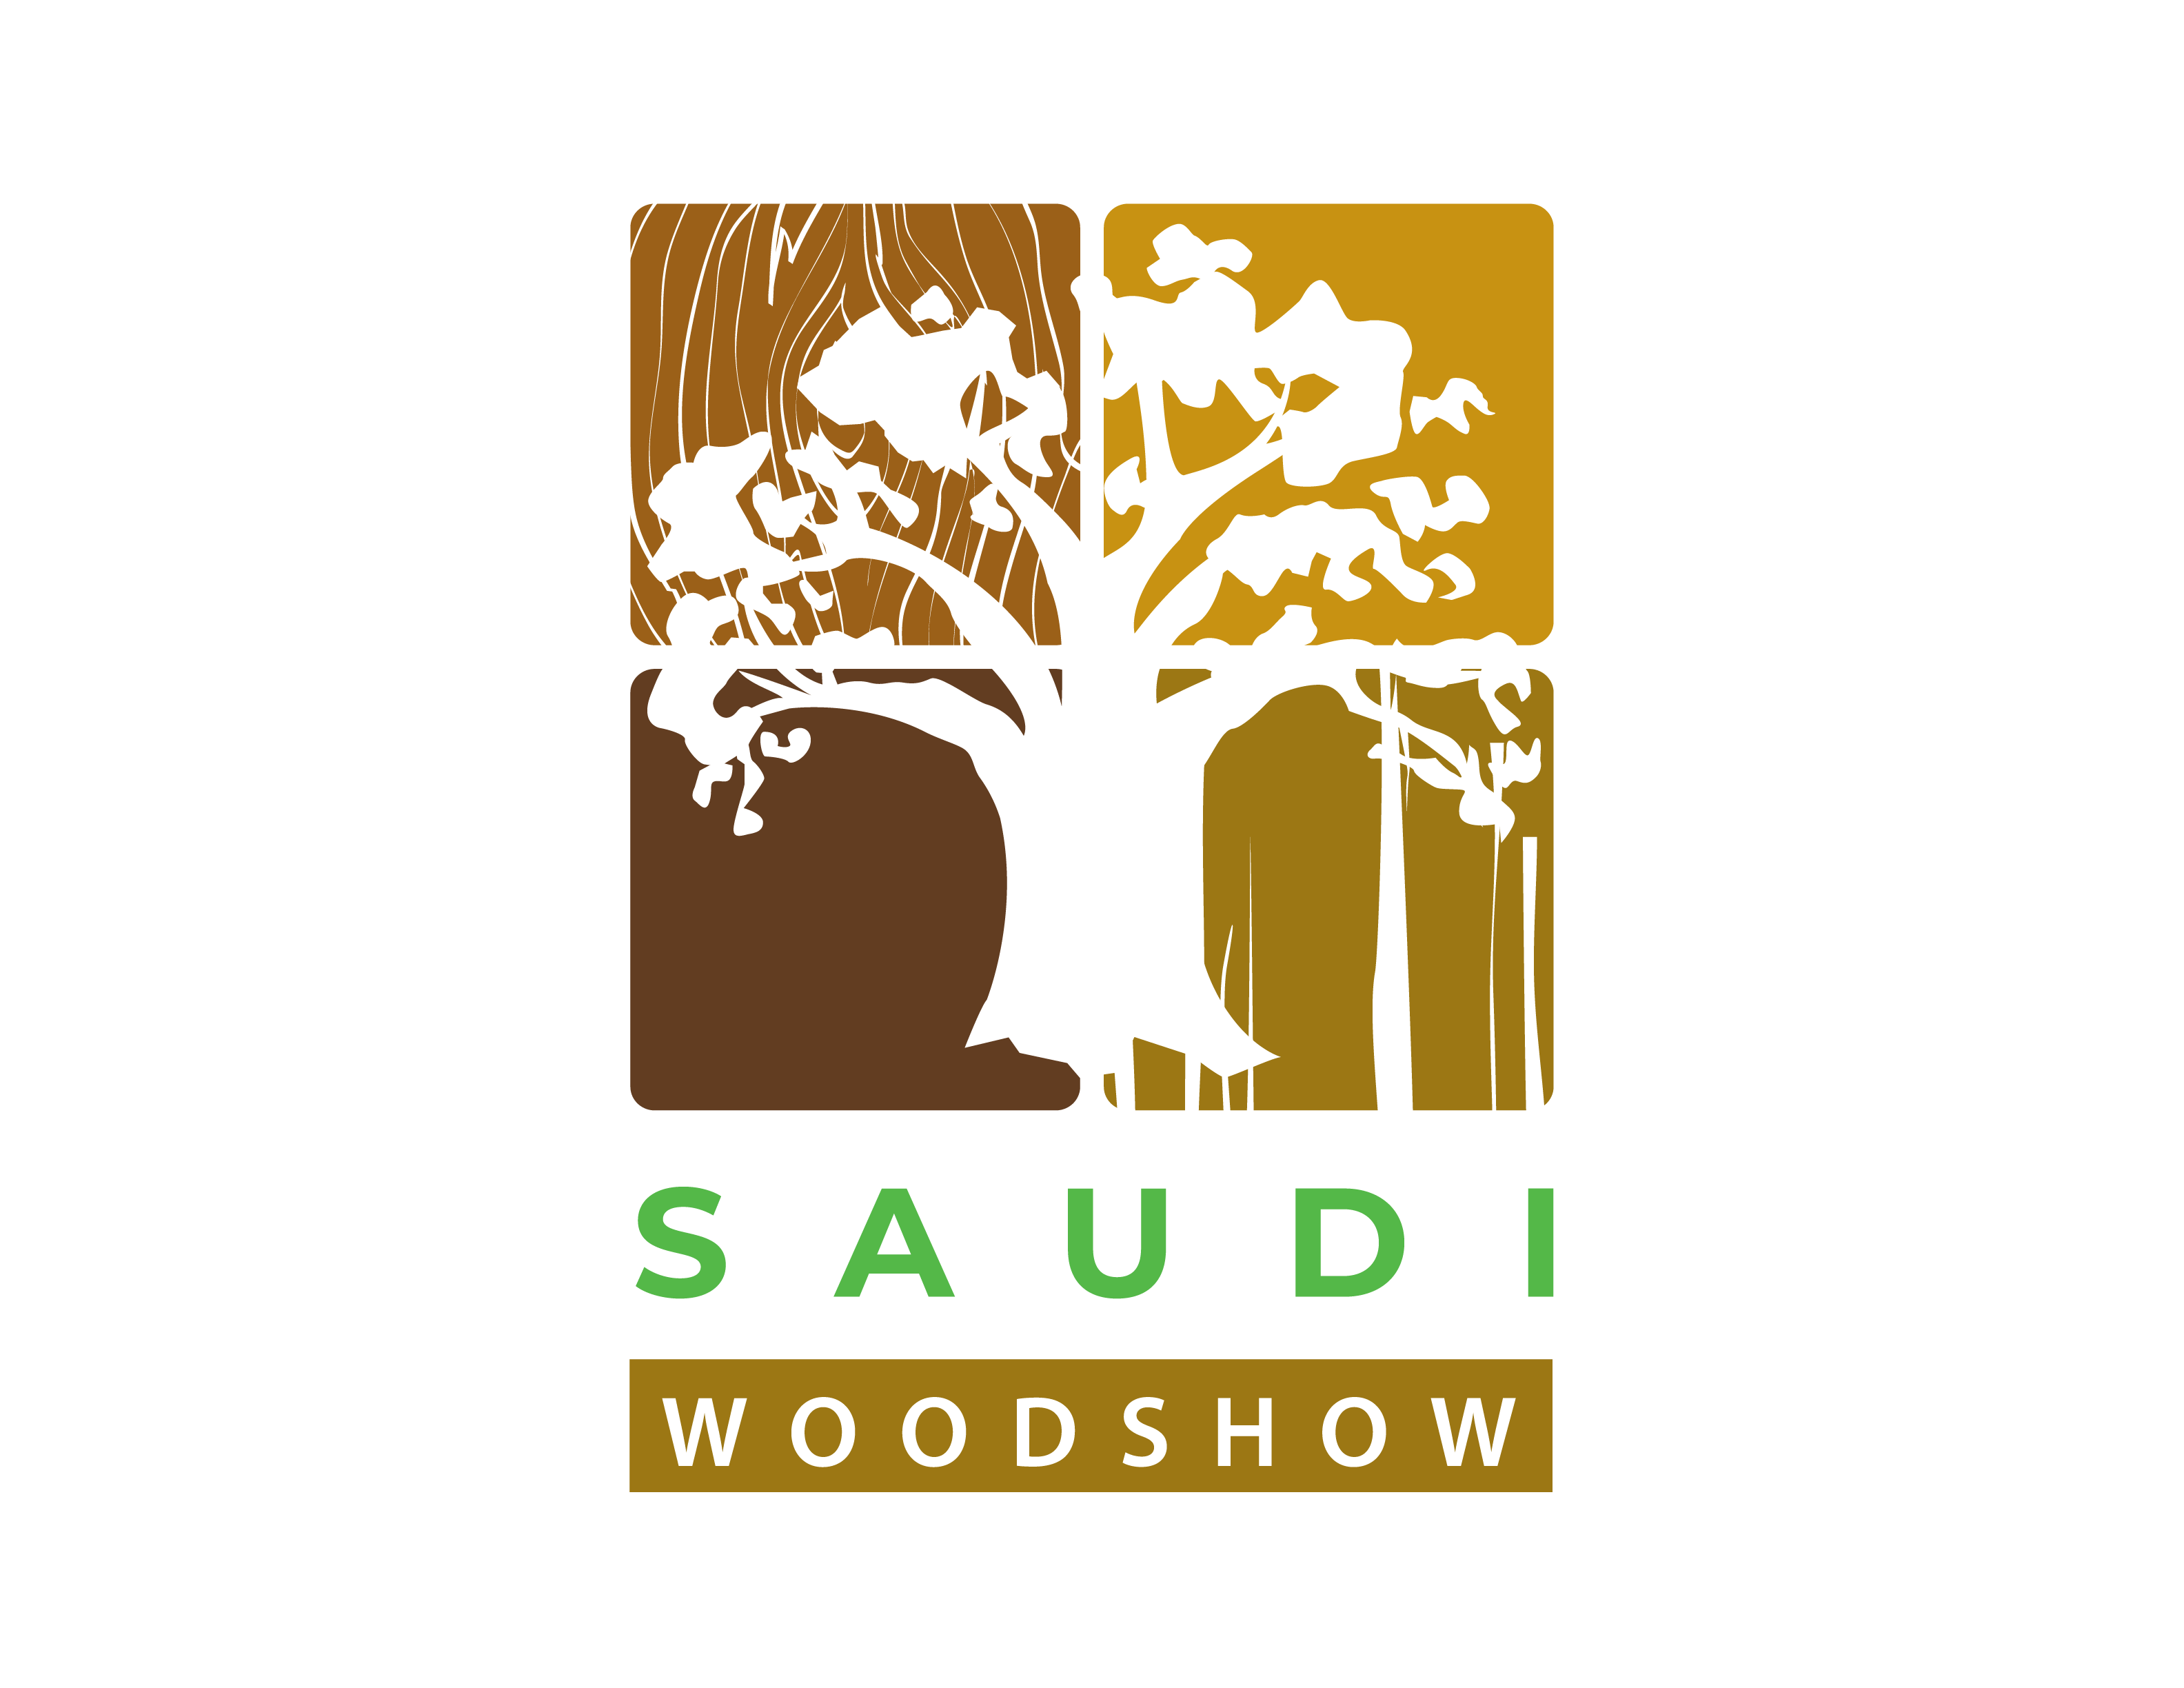 strategic-conferences-and-exhibitions-enters-a-new-phase-in-saudi-arabia-with-the-launch-of-saudi-woodshow